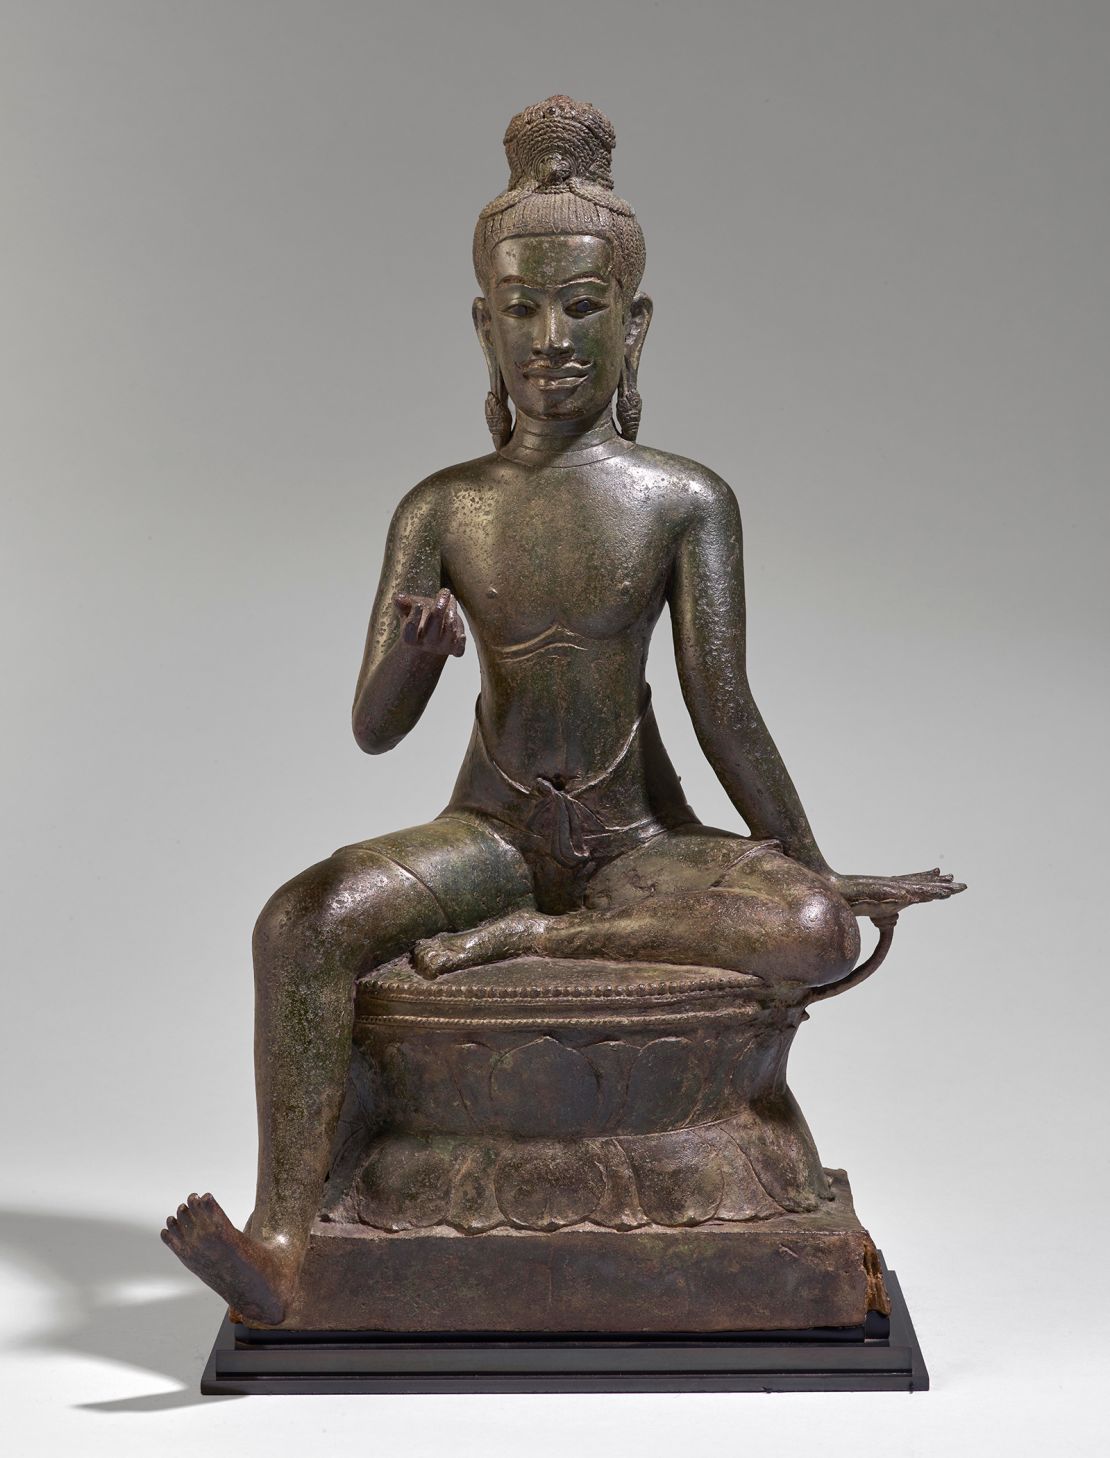 A bronze statue of a male deity dating back to the late 11th century.